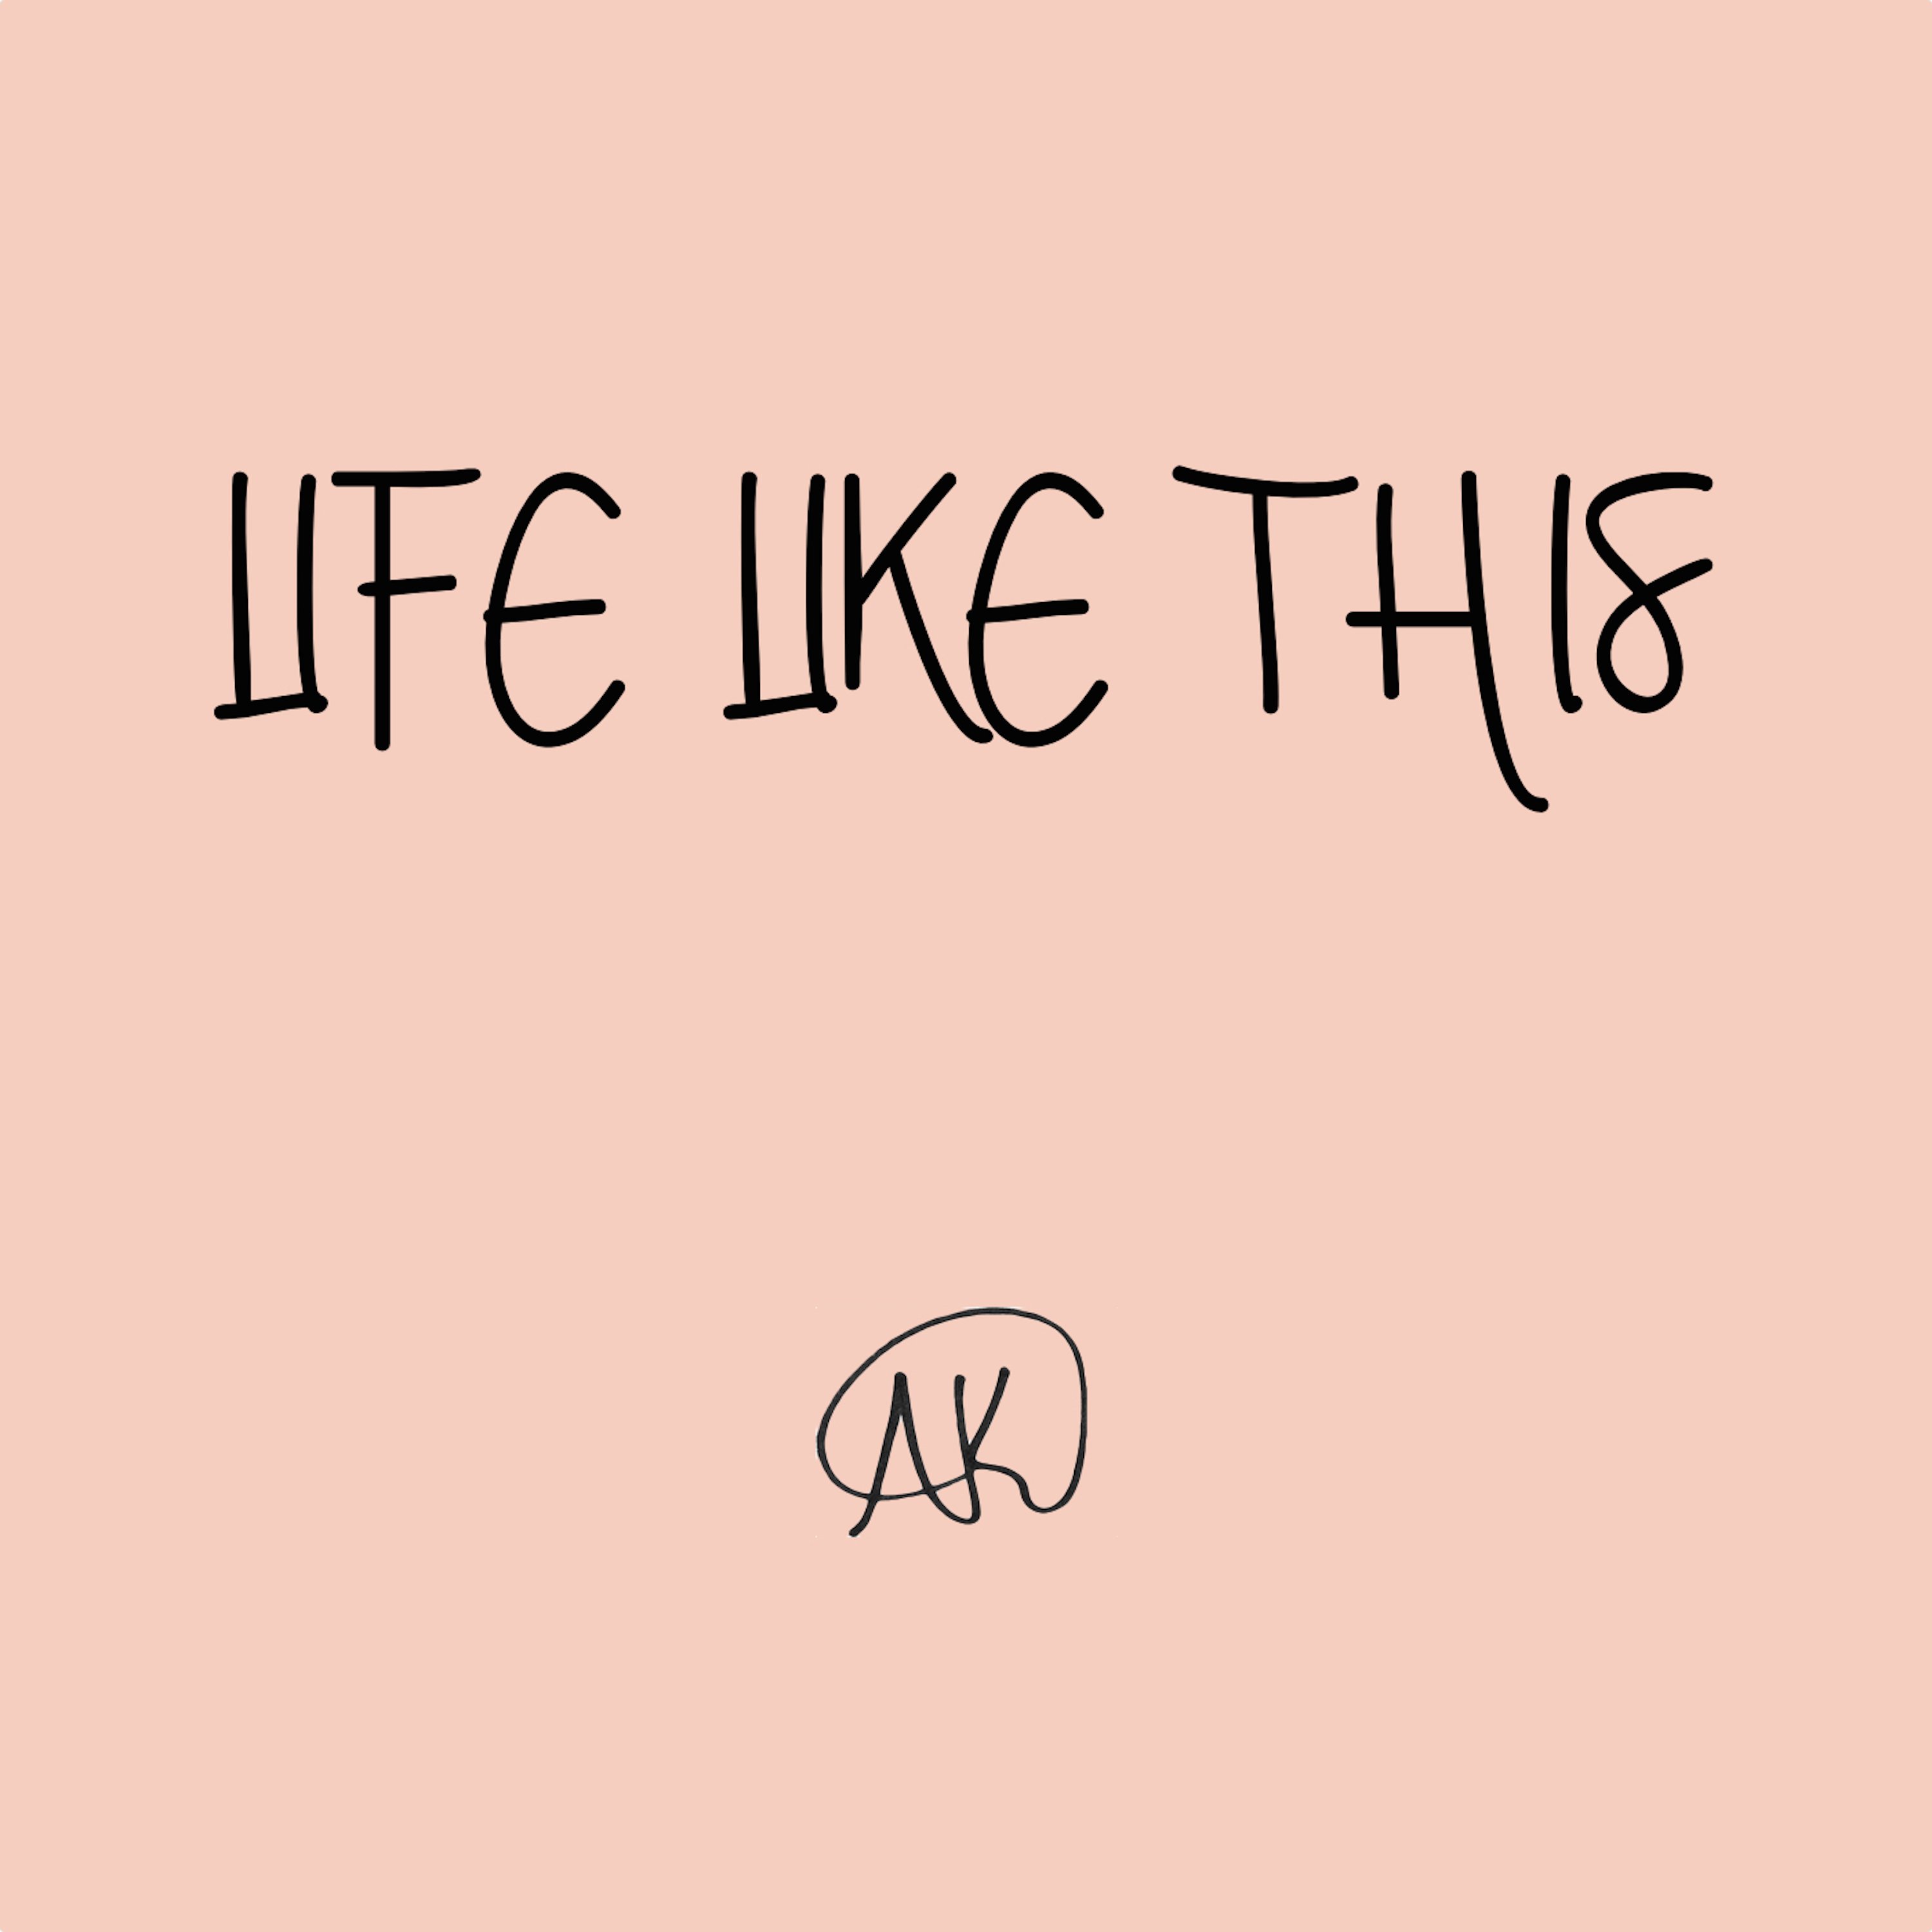 My life be like ares. AK Life like this. Картинки like Life. This Life. Life like 8439.